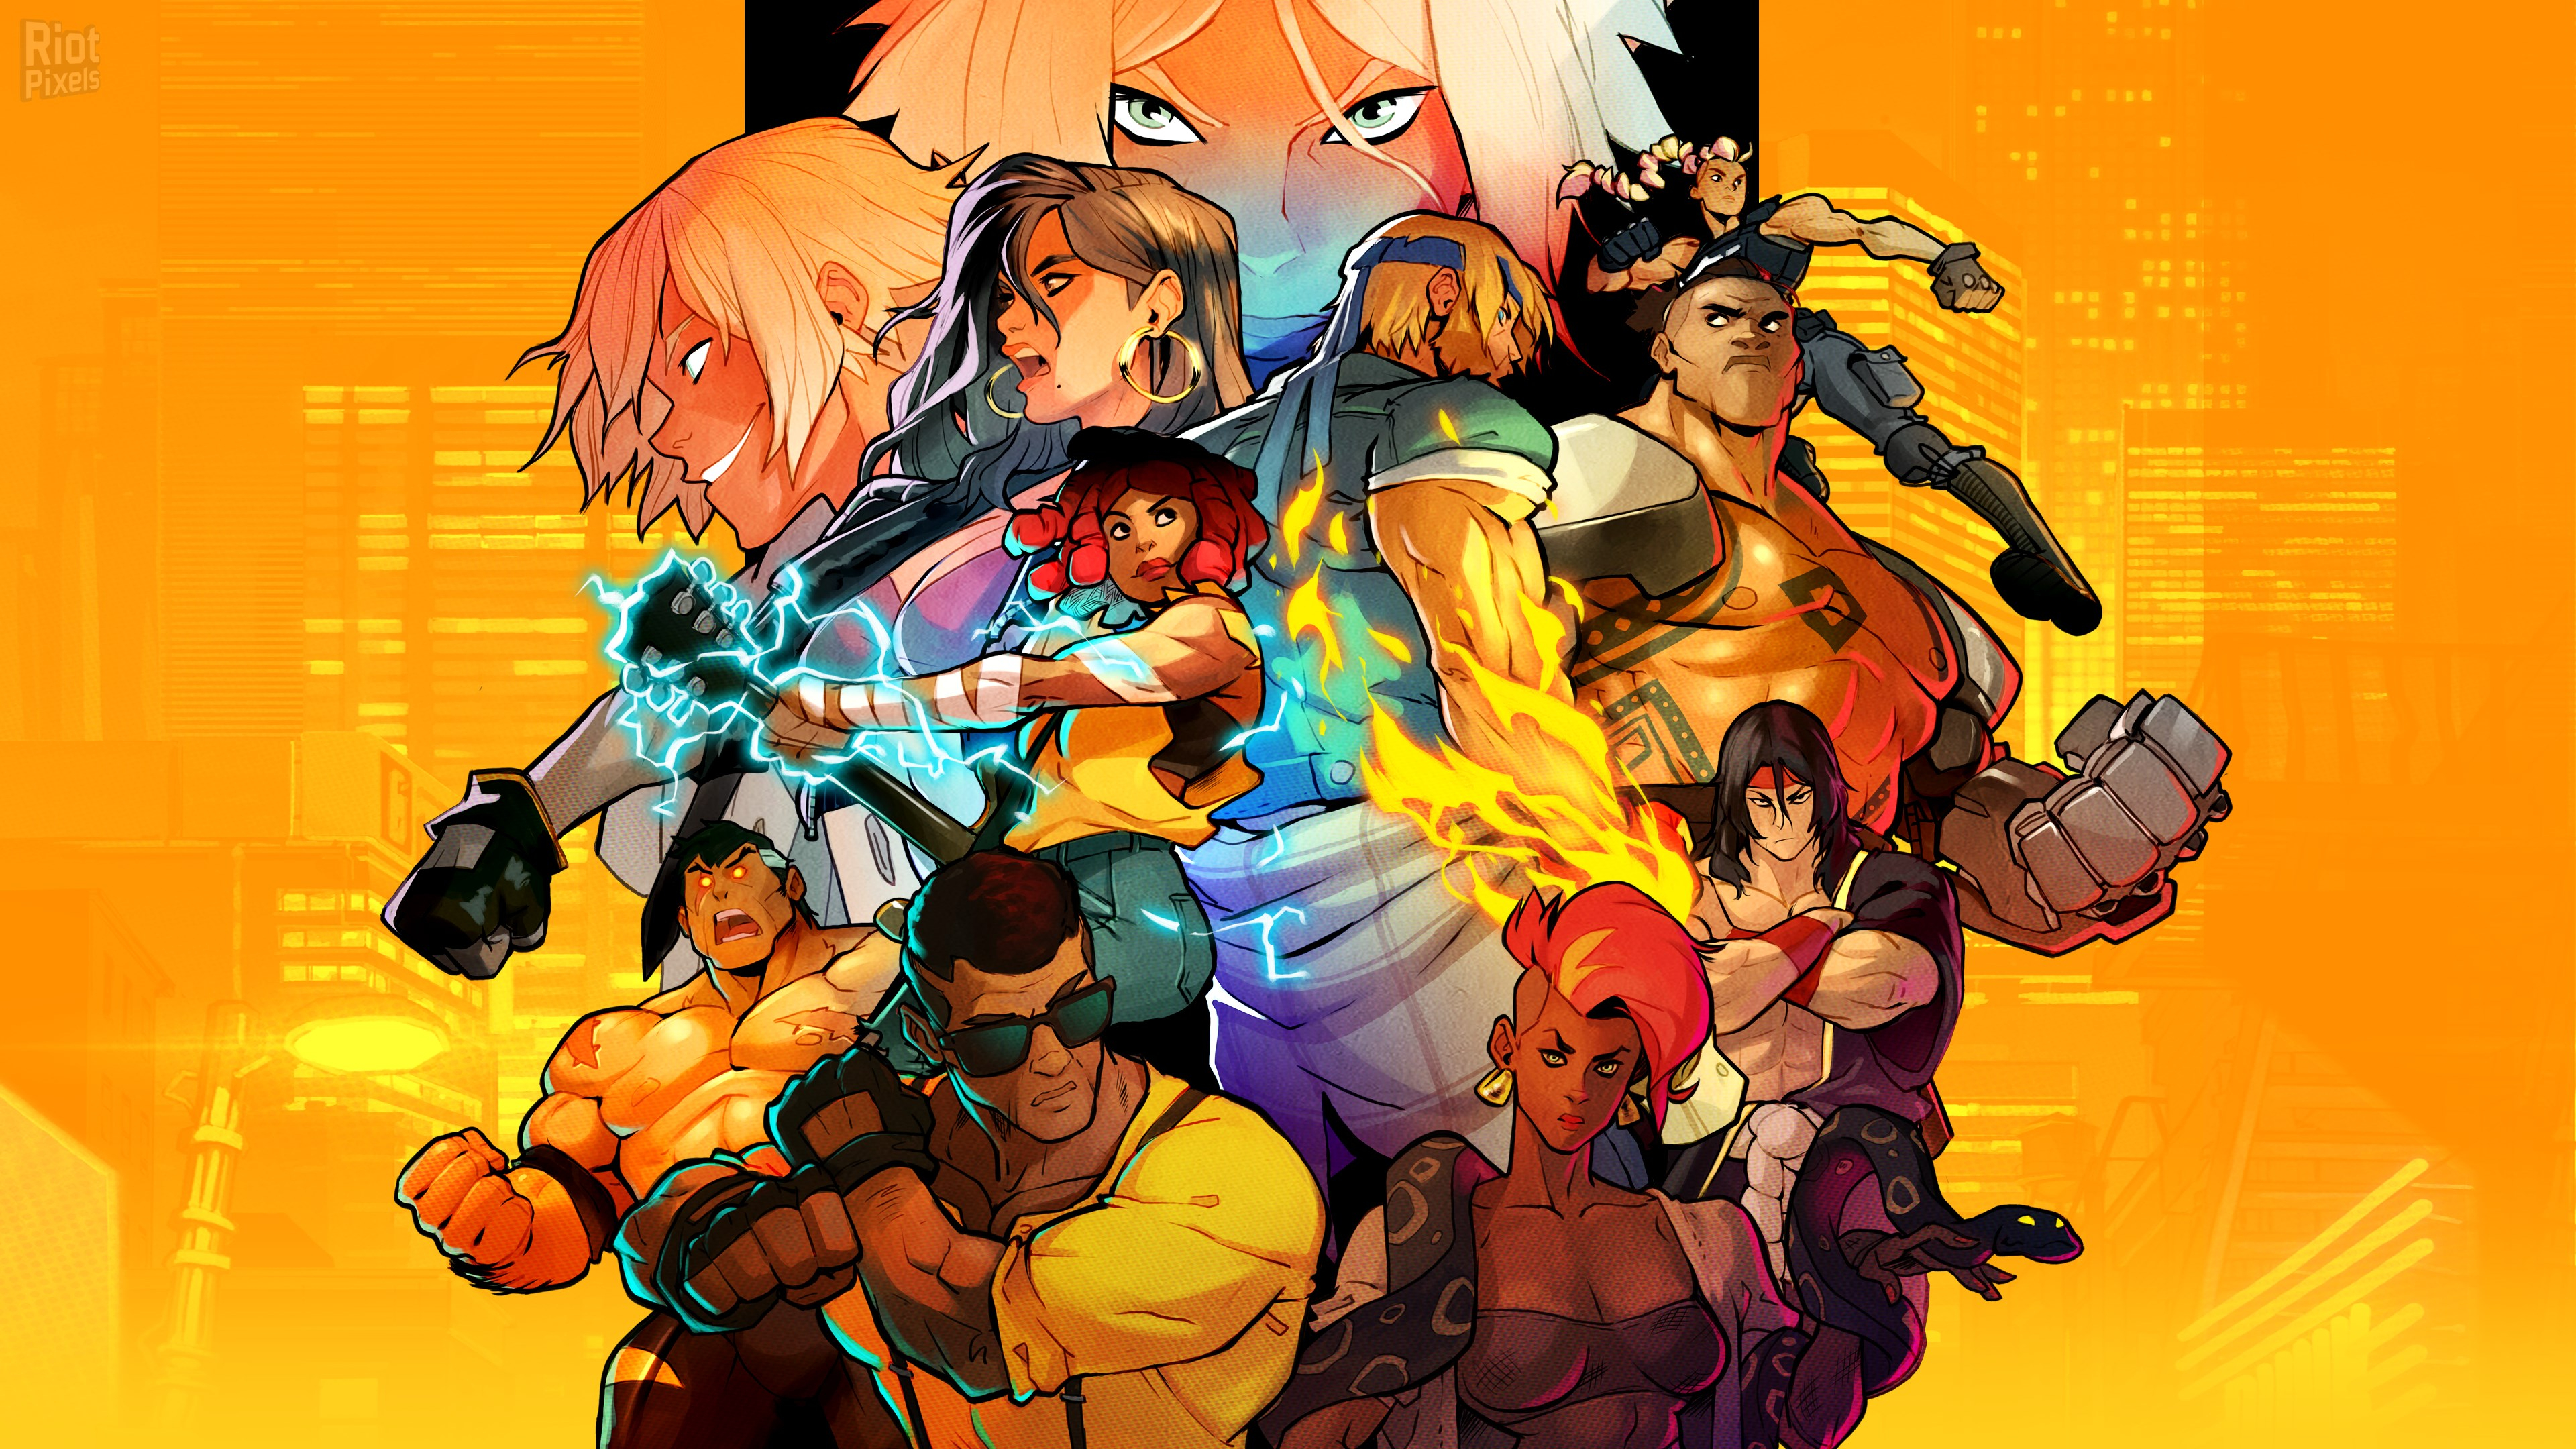 3840x2160 Streets of Rage 4 game wallpaper at Riot Pixels, image